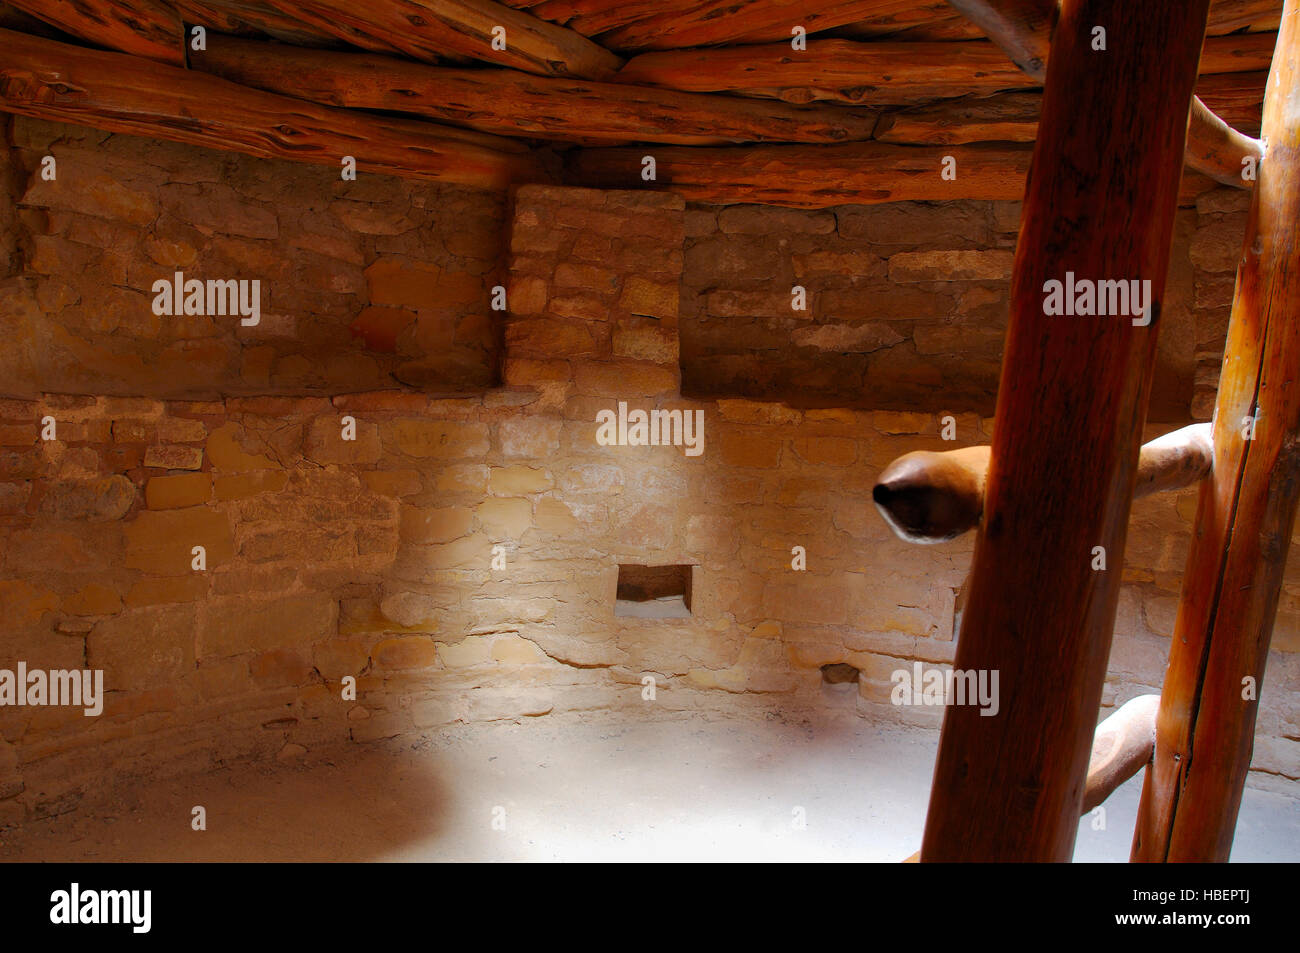 Restored Kiva C, Ladder to Entrance, Pilasters supporting Roof, Spruce Tree House Cliff Dwelling, Anasazi Hisatsinom Ancestral Pueblo Site, Chapin Mes Stock Photo